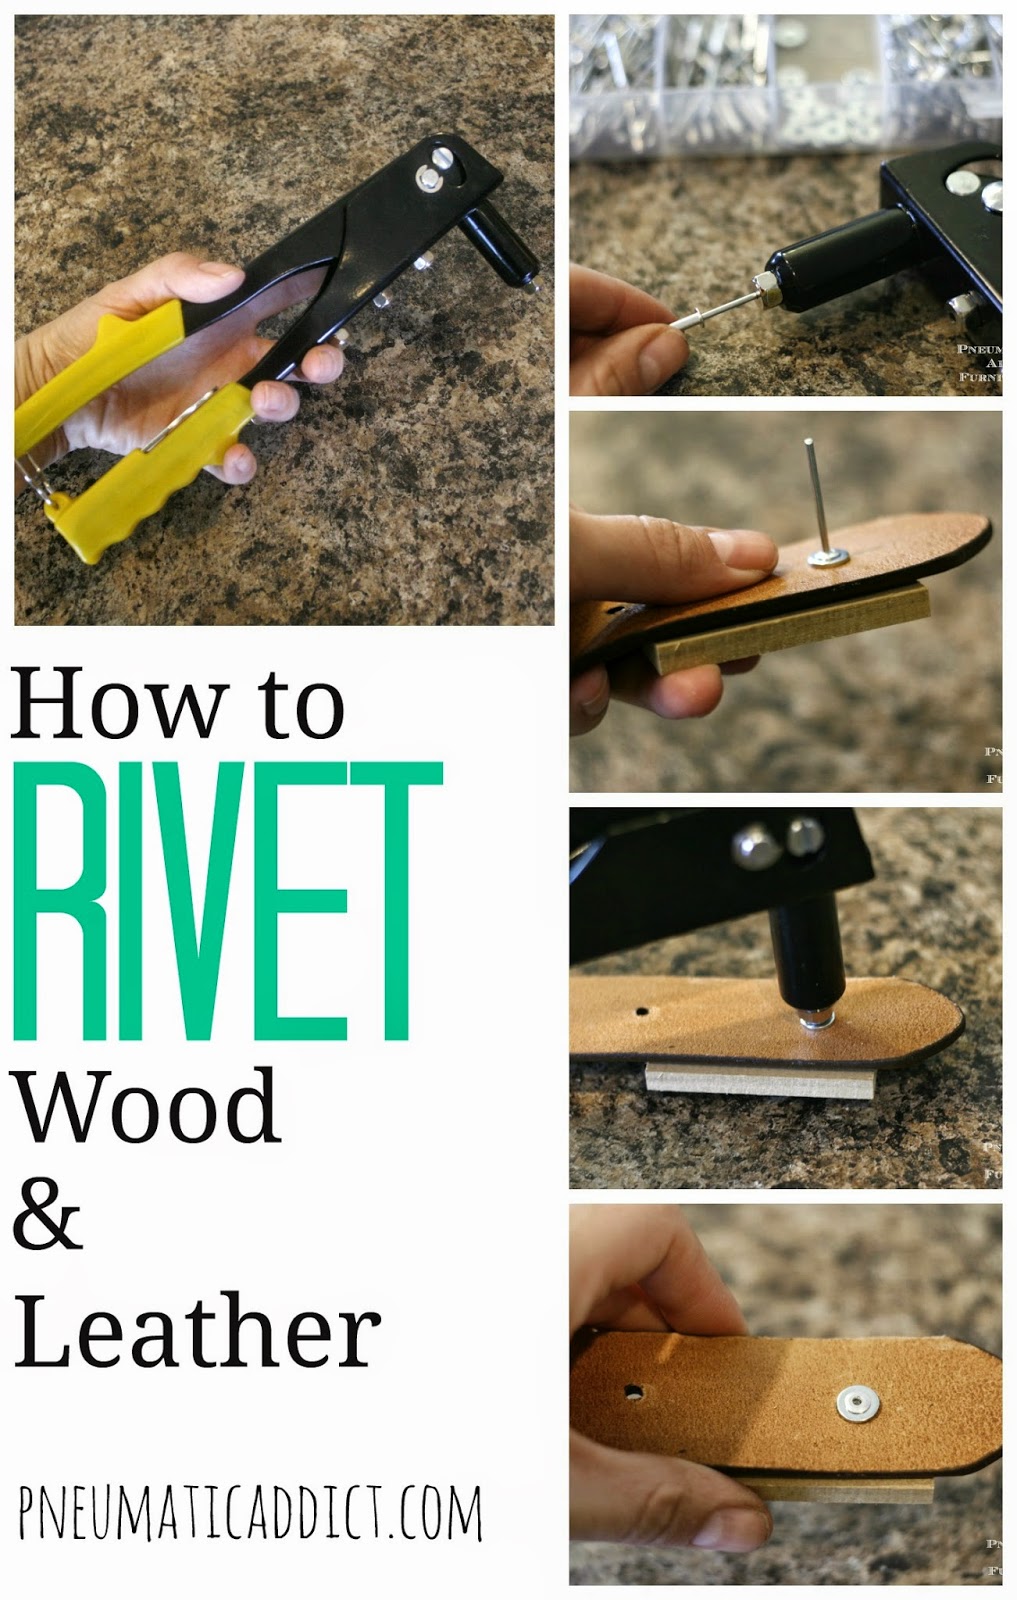 How to Rivet Wood and/or Leather